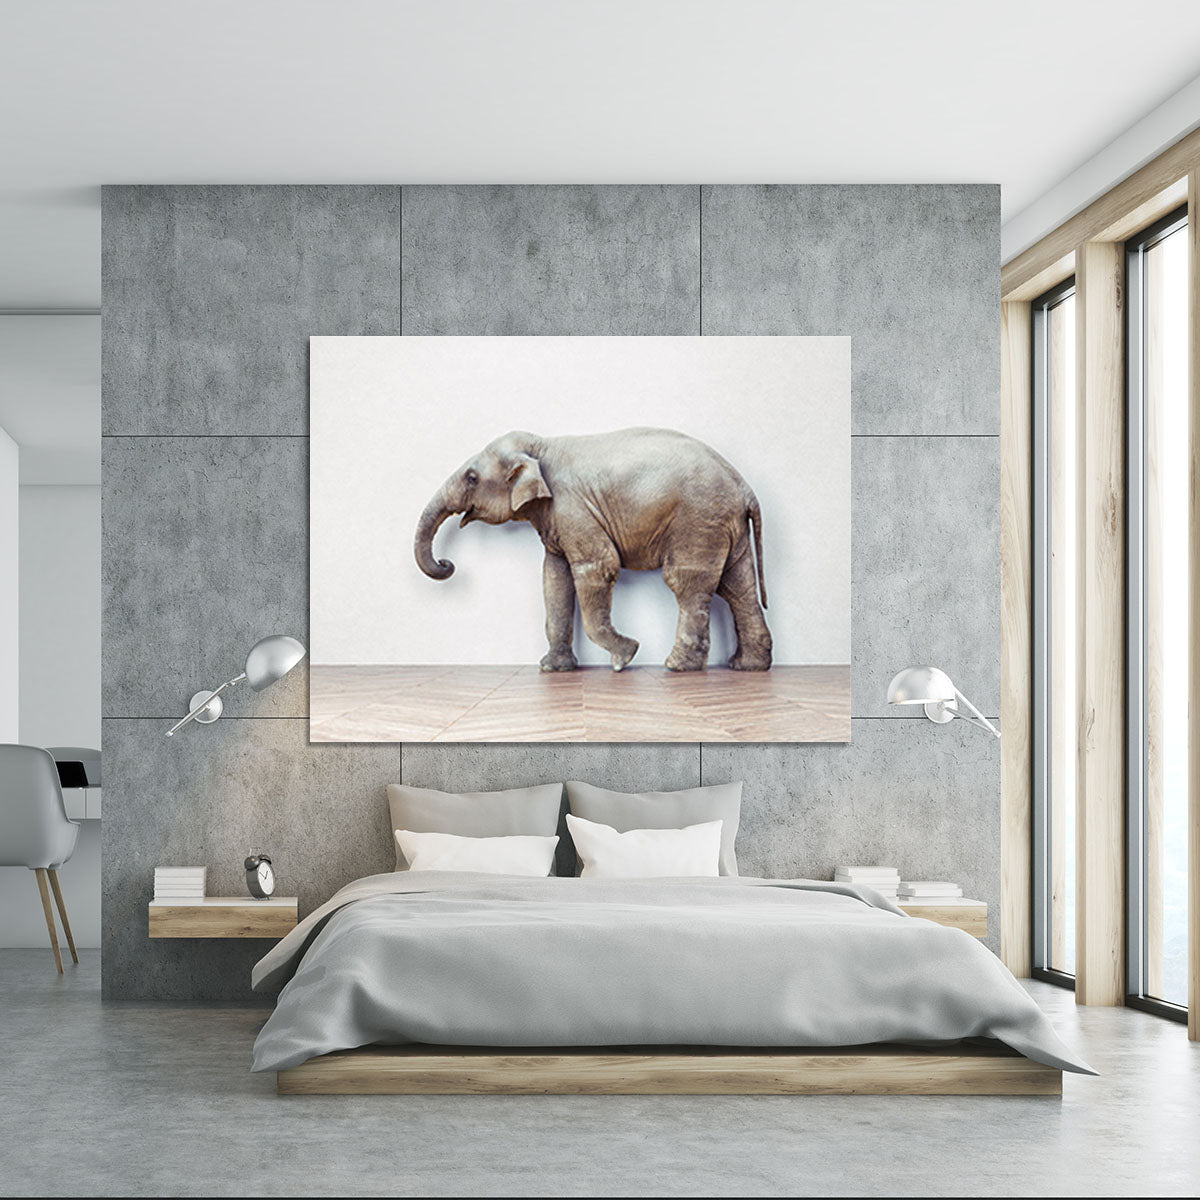 The elephant calm in the room near white wall Canvas Print or Poster - Canvas Art Rocks - 5